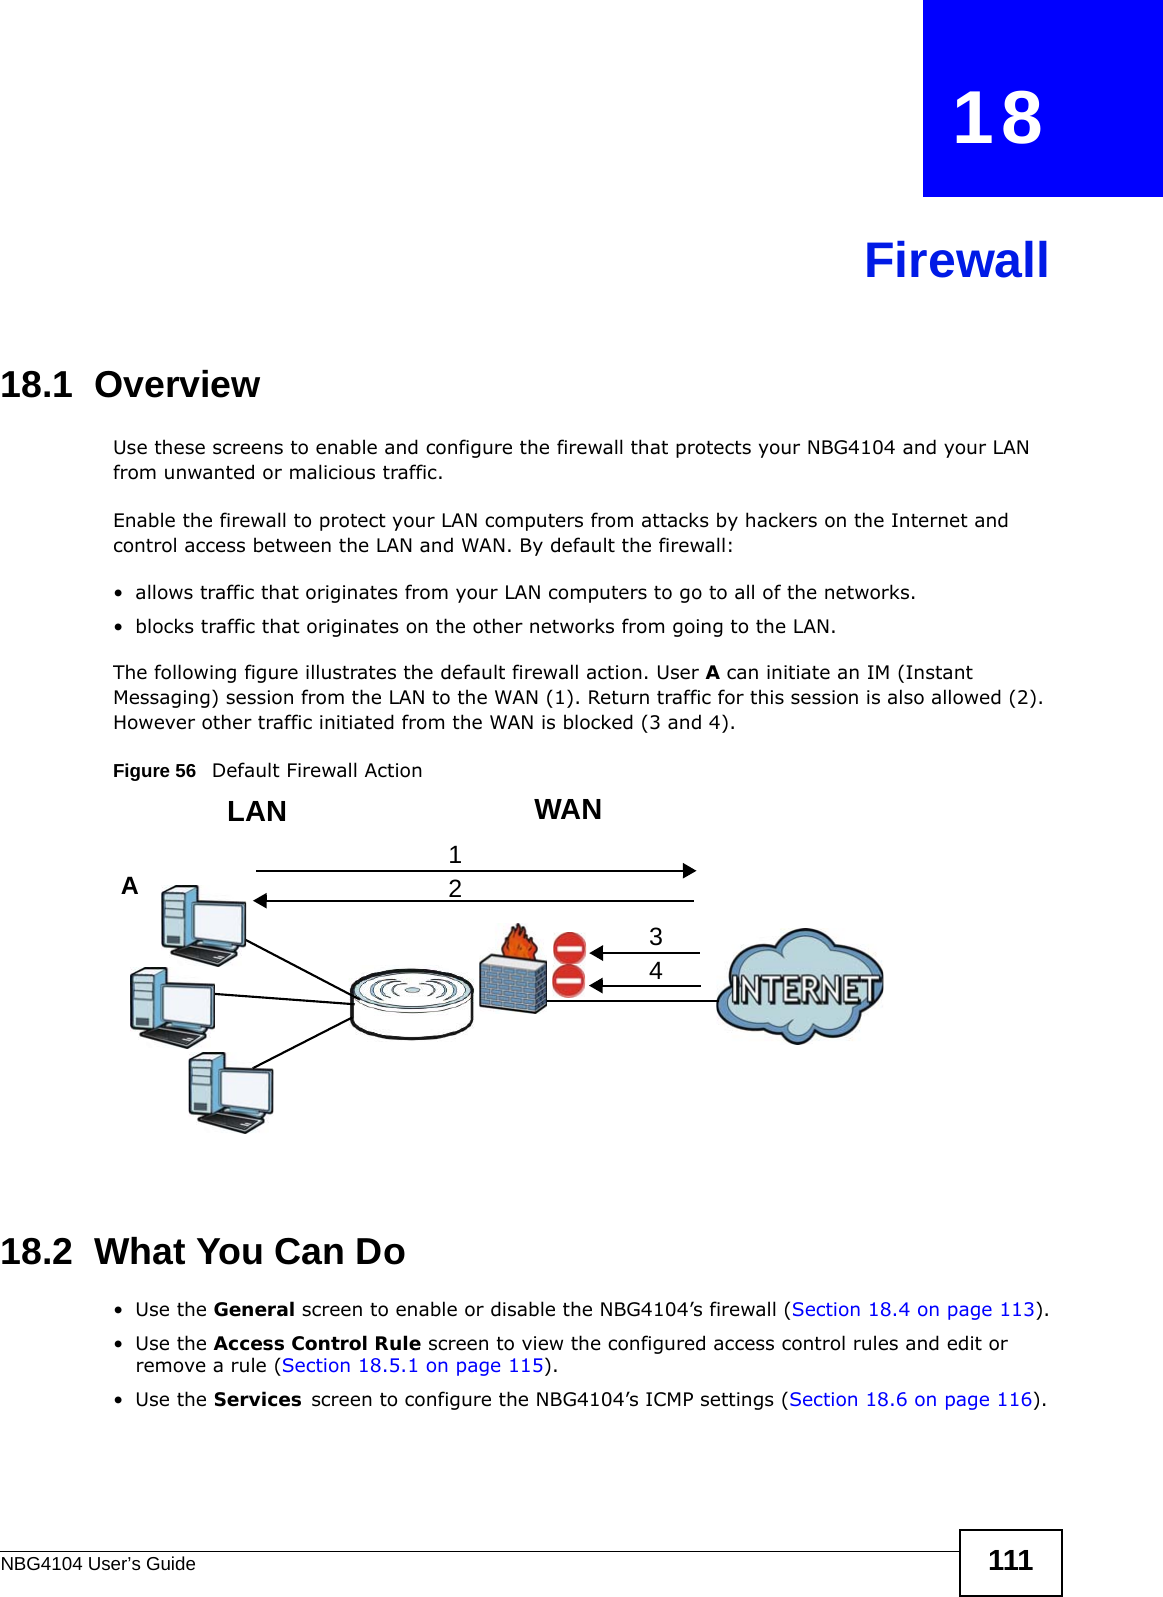 NBG4104 User’s Guide 111CHAPTER   18Firewall18.1  Overview   Use these screens to enable and configure the firewall that protects your NBG4104 and your LAN from unwanted or malicious traffic.Enable the firewall to protect your LAN computers from attacks by hackers on the Internet and control access between the LAN and WAN. By default the firewall:• allows traffic that originates from your LAN computers to go to all of the networks. • blocks traffic that originates on the other networks from going to the LAN. The following figure illustrates the default firewall action. User A can initiate an IM (Instant Messaging) session from the LAN to the WAN (1). Return traffic for this session is also allowed (2). However other traffic initiated from the WAN is blocked (3 and 4).Figure 56   Default Firewall Action18.2  What You Can Do•Use the General screen to enable or disable the NBG4104’s firewall (Section 18.4 on page 113).•Use the Access Control Rule screen to view the configured access control rules and edit or remove a rule (Section 18.5.1 on page 115).•Use the Services screen to configure the NBG4104’s ICMP settings (Section 18.6 on page 116).WANLAN3412A